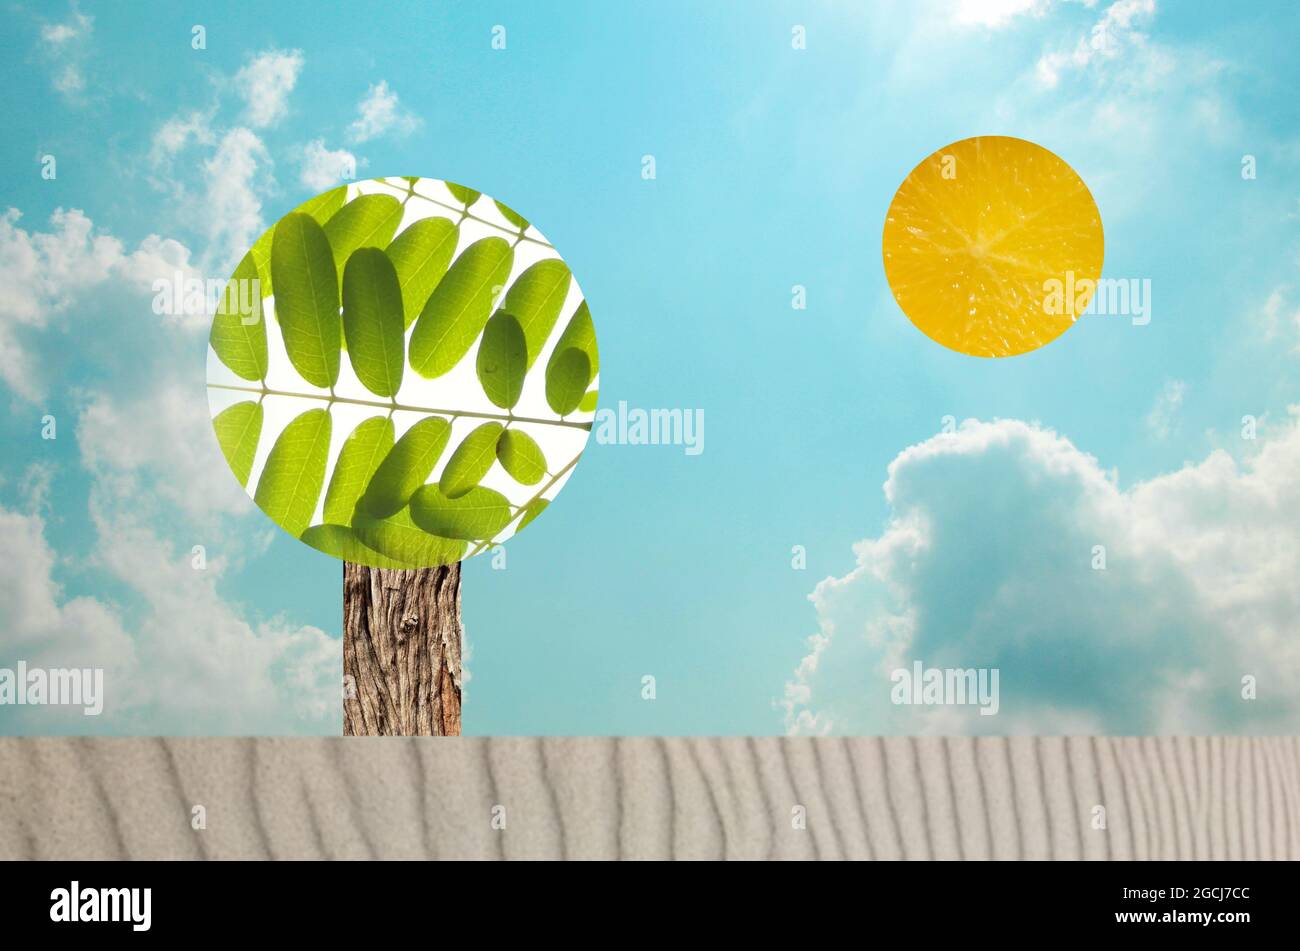 Beautiful and simple landscape, ecology concept Stock Photo